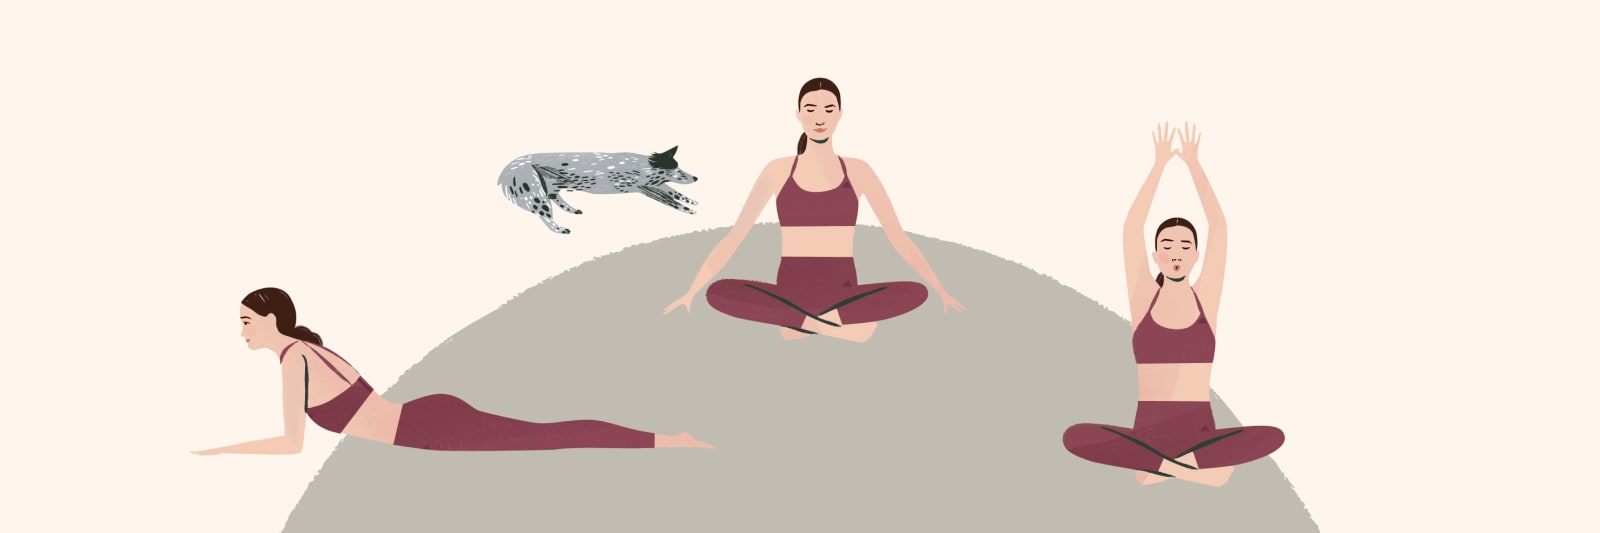 TYPES OF YOGA: A DEFINITIVE GUIDE TO 4 POPULAR STYLES